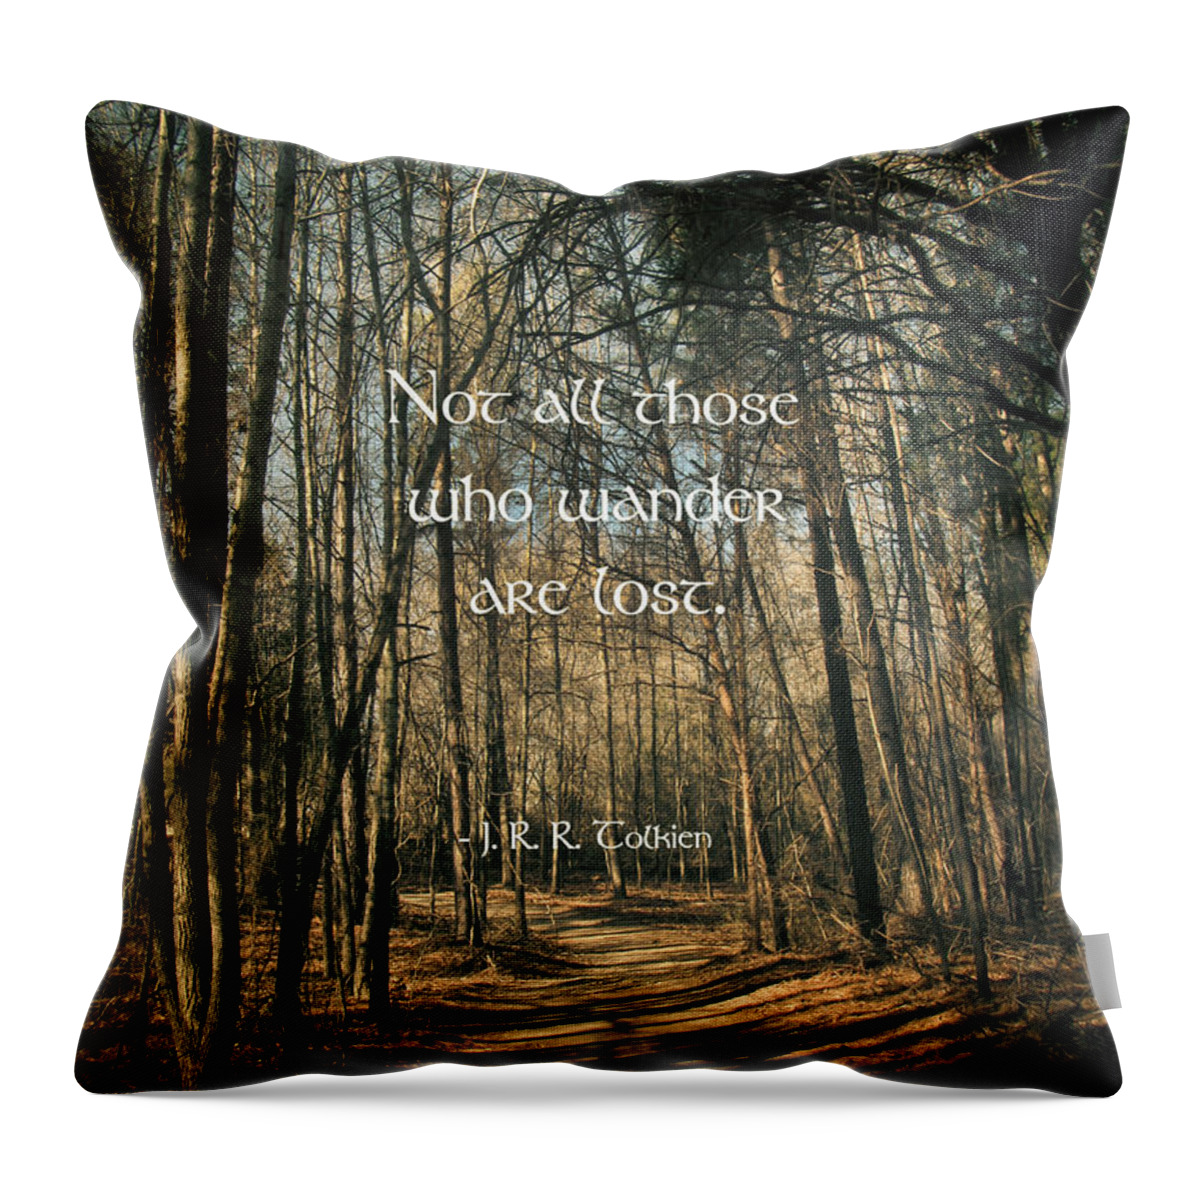 Tolkien Throw Pillow featuring the photograph Not All Those Who Wander by Jessica Brawley